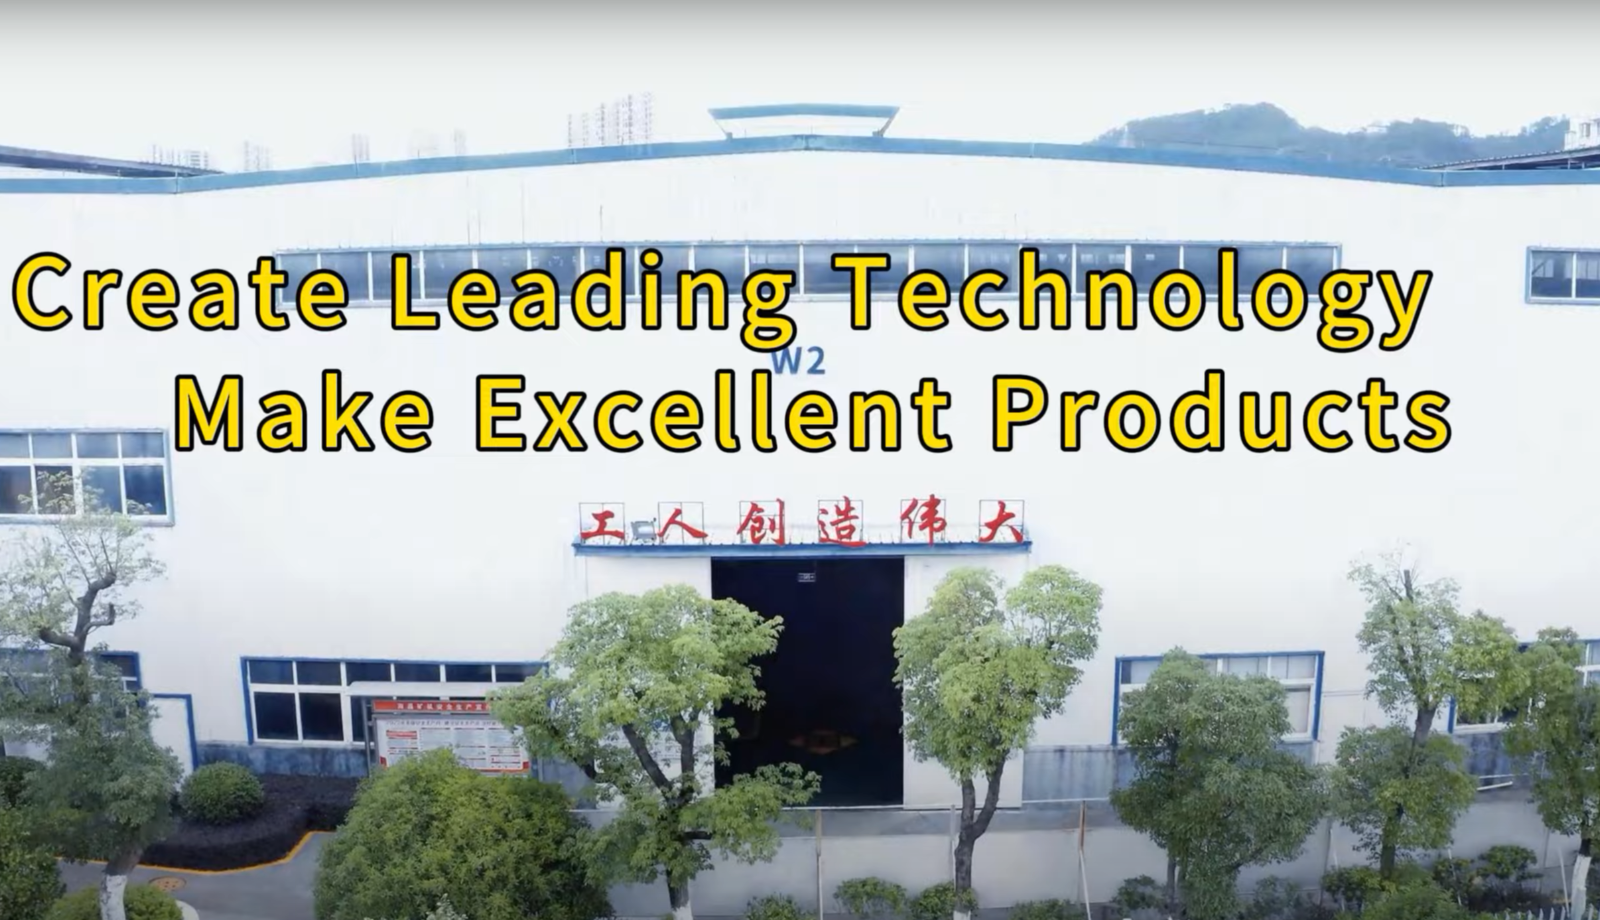 Create Leading Technology Make Excellent Products